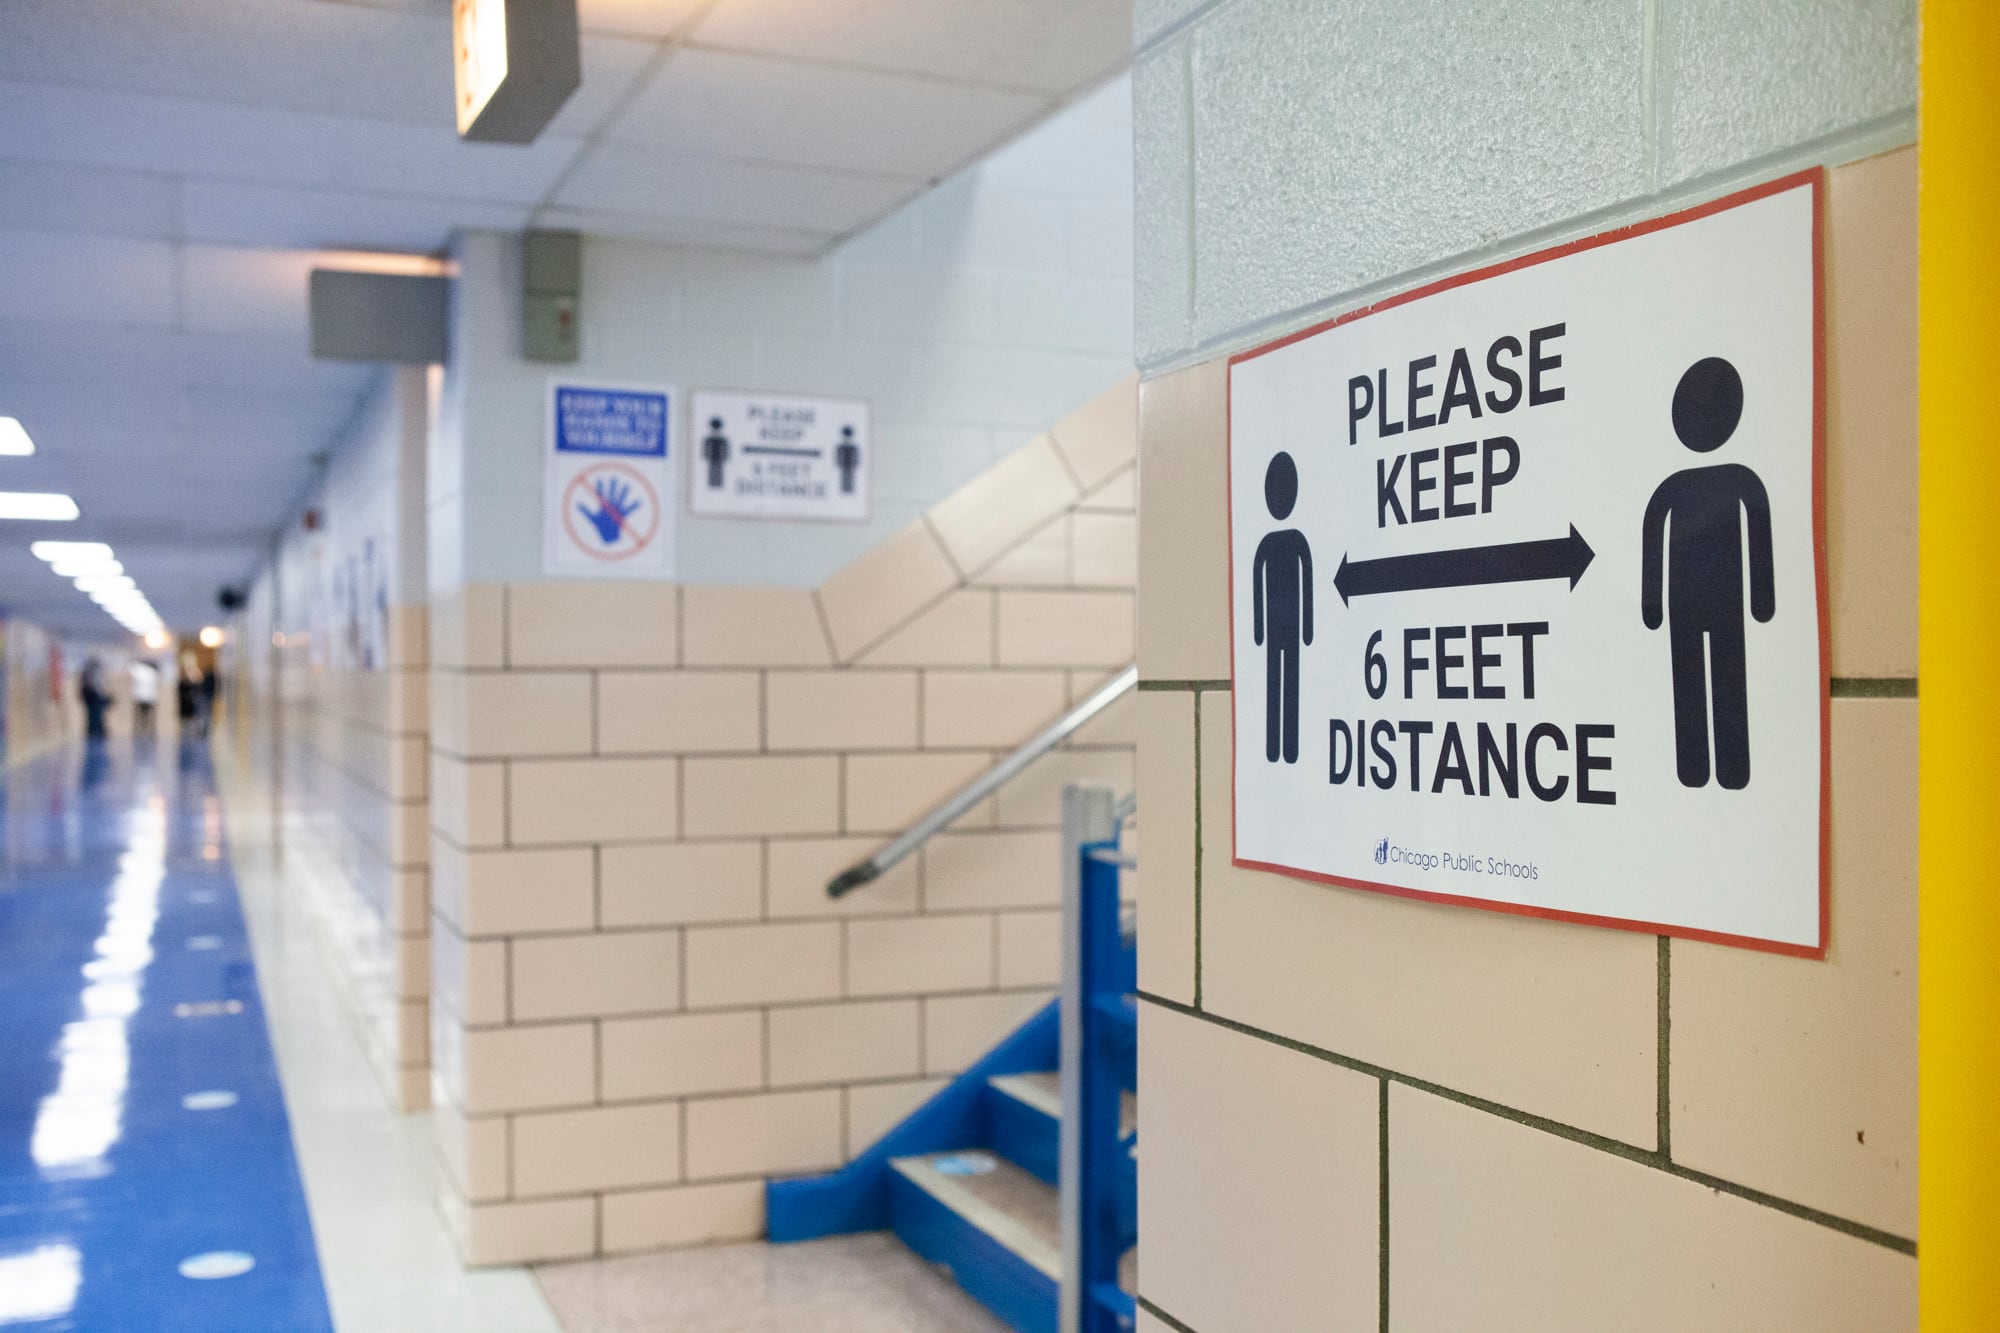 A sign in a school hallway reminding students to keep 6 feet distance apart.